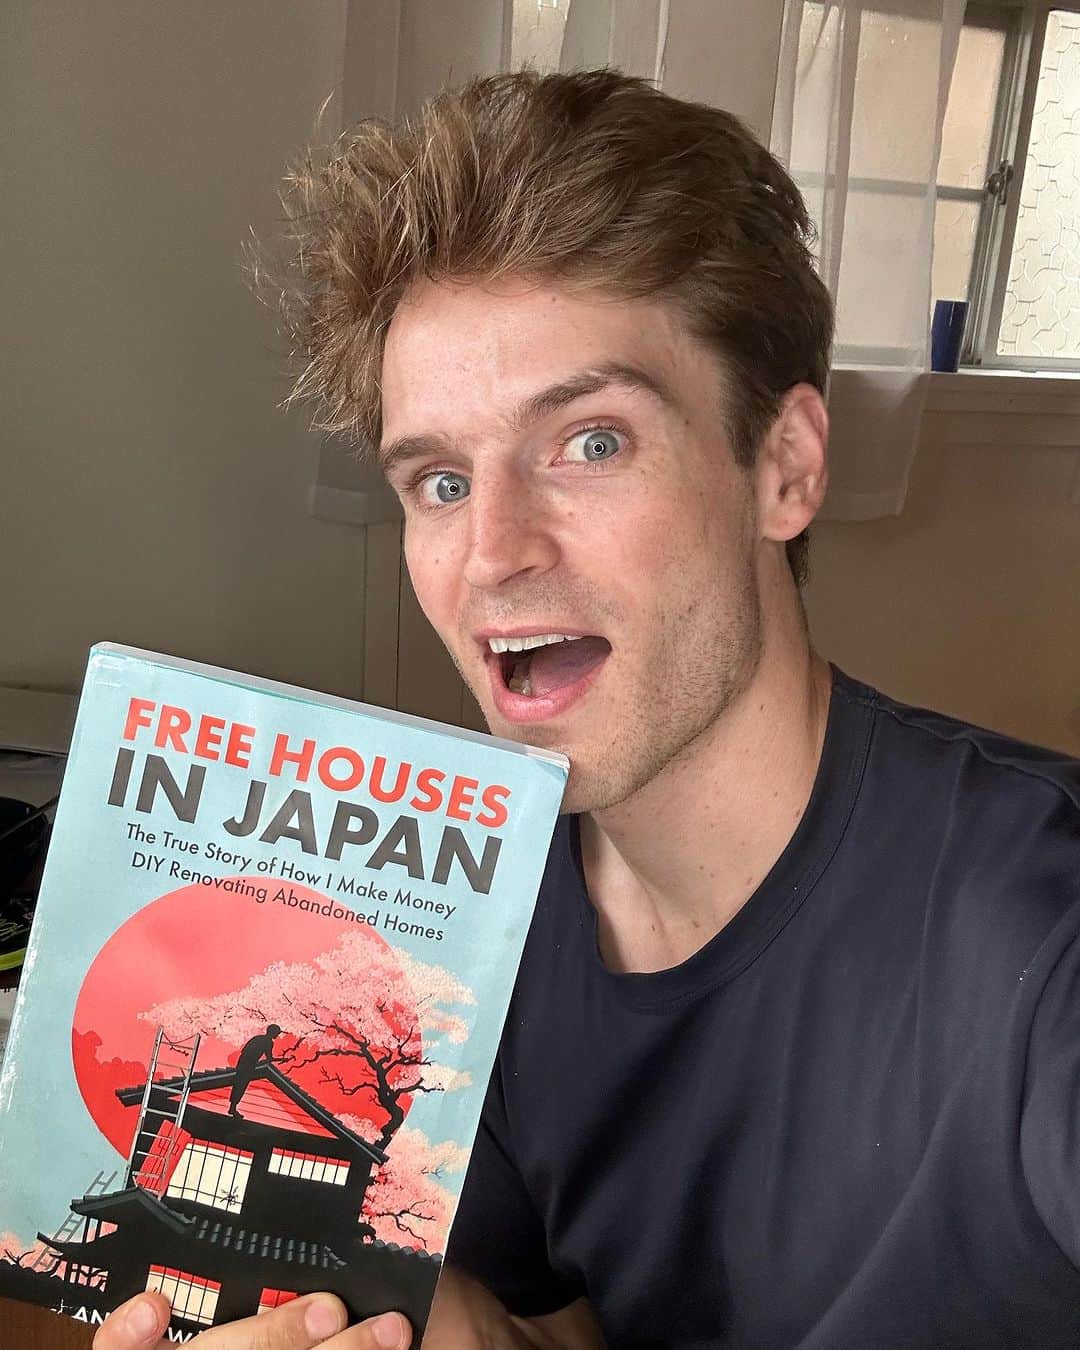 Anton Wormannのインスタグラム：「🏡 Exciting News! 🏡  My book "Free Houses in Japan" is now available for PRE-ORDERS on Amazon! 📚✨ 🥇 Honored to be the #1 New Release in the entire category of Buying & Selling Homes! 🌟  Pre-orders are open for the e-book, and the paperback will officially launch on November 7th. 📆📖 Don't miss out! - Get your copy Now! 💡link in bio 📲💫 #FreeHousesInJapan #Japan #Renovation #Tokyo #Akiya #RealEstate #AntoninJapan #lifeinjapan」